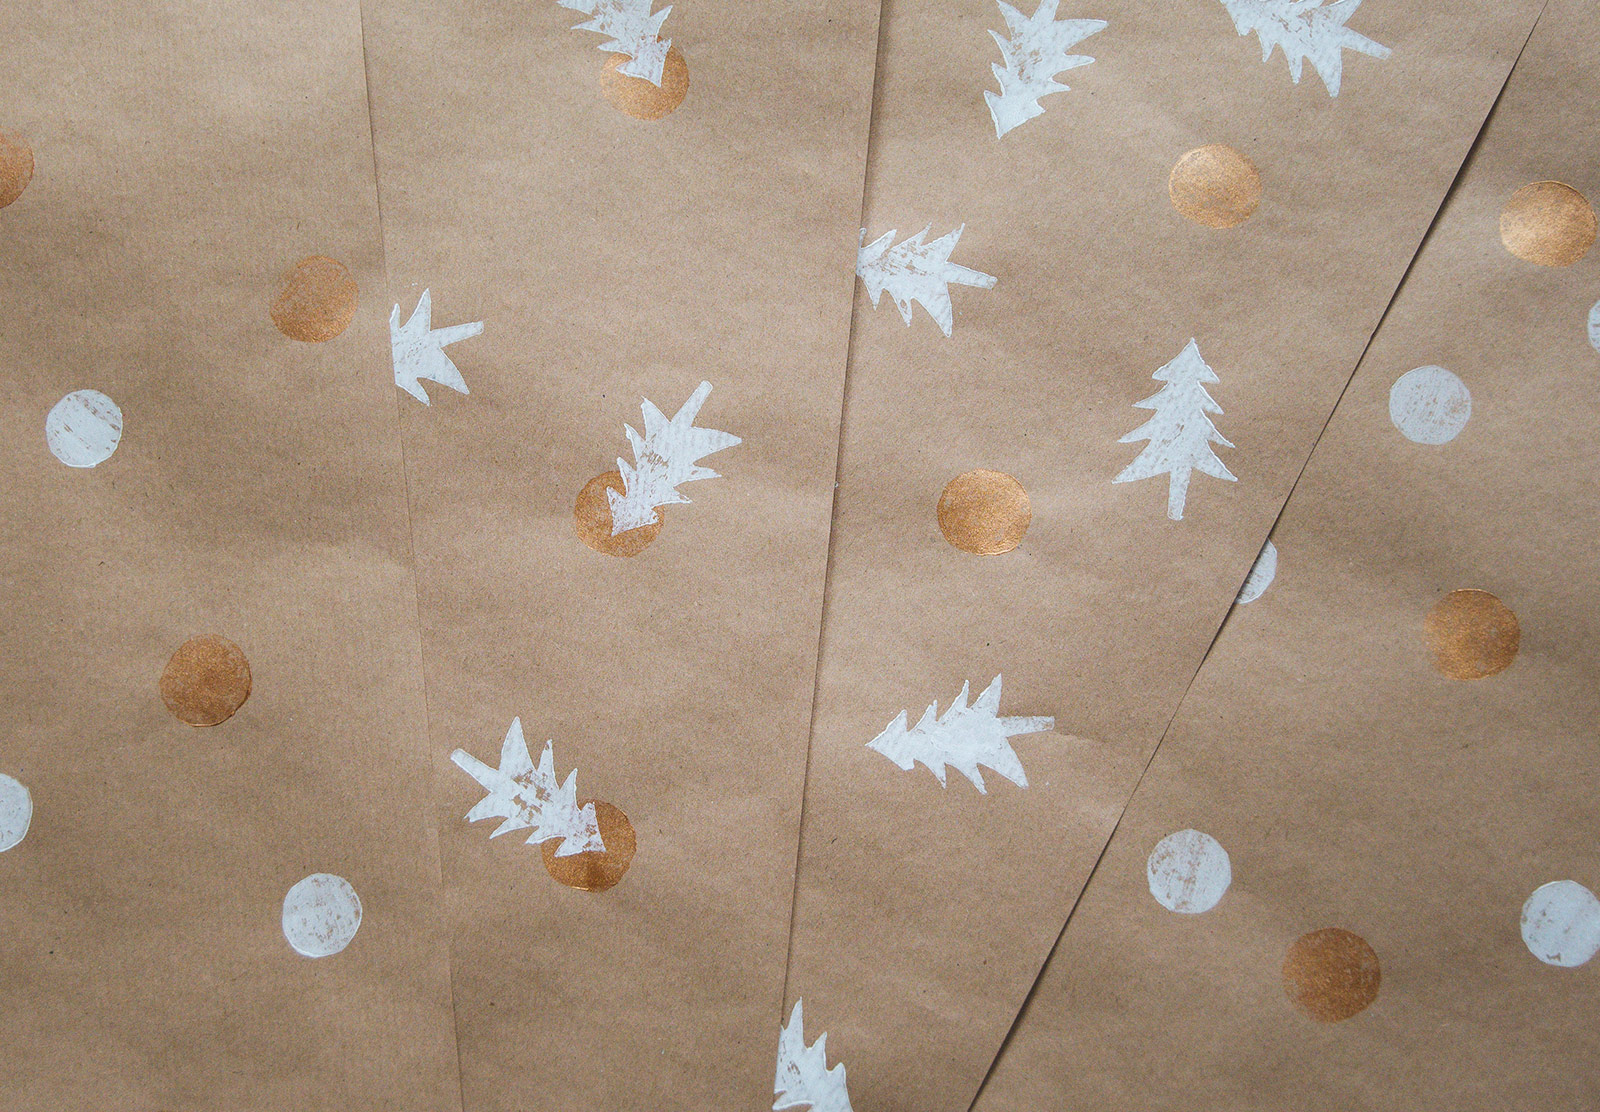 Sheets of wrapping paper